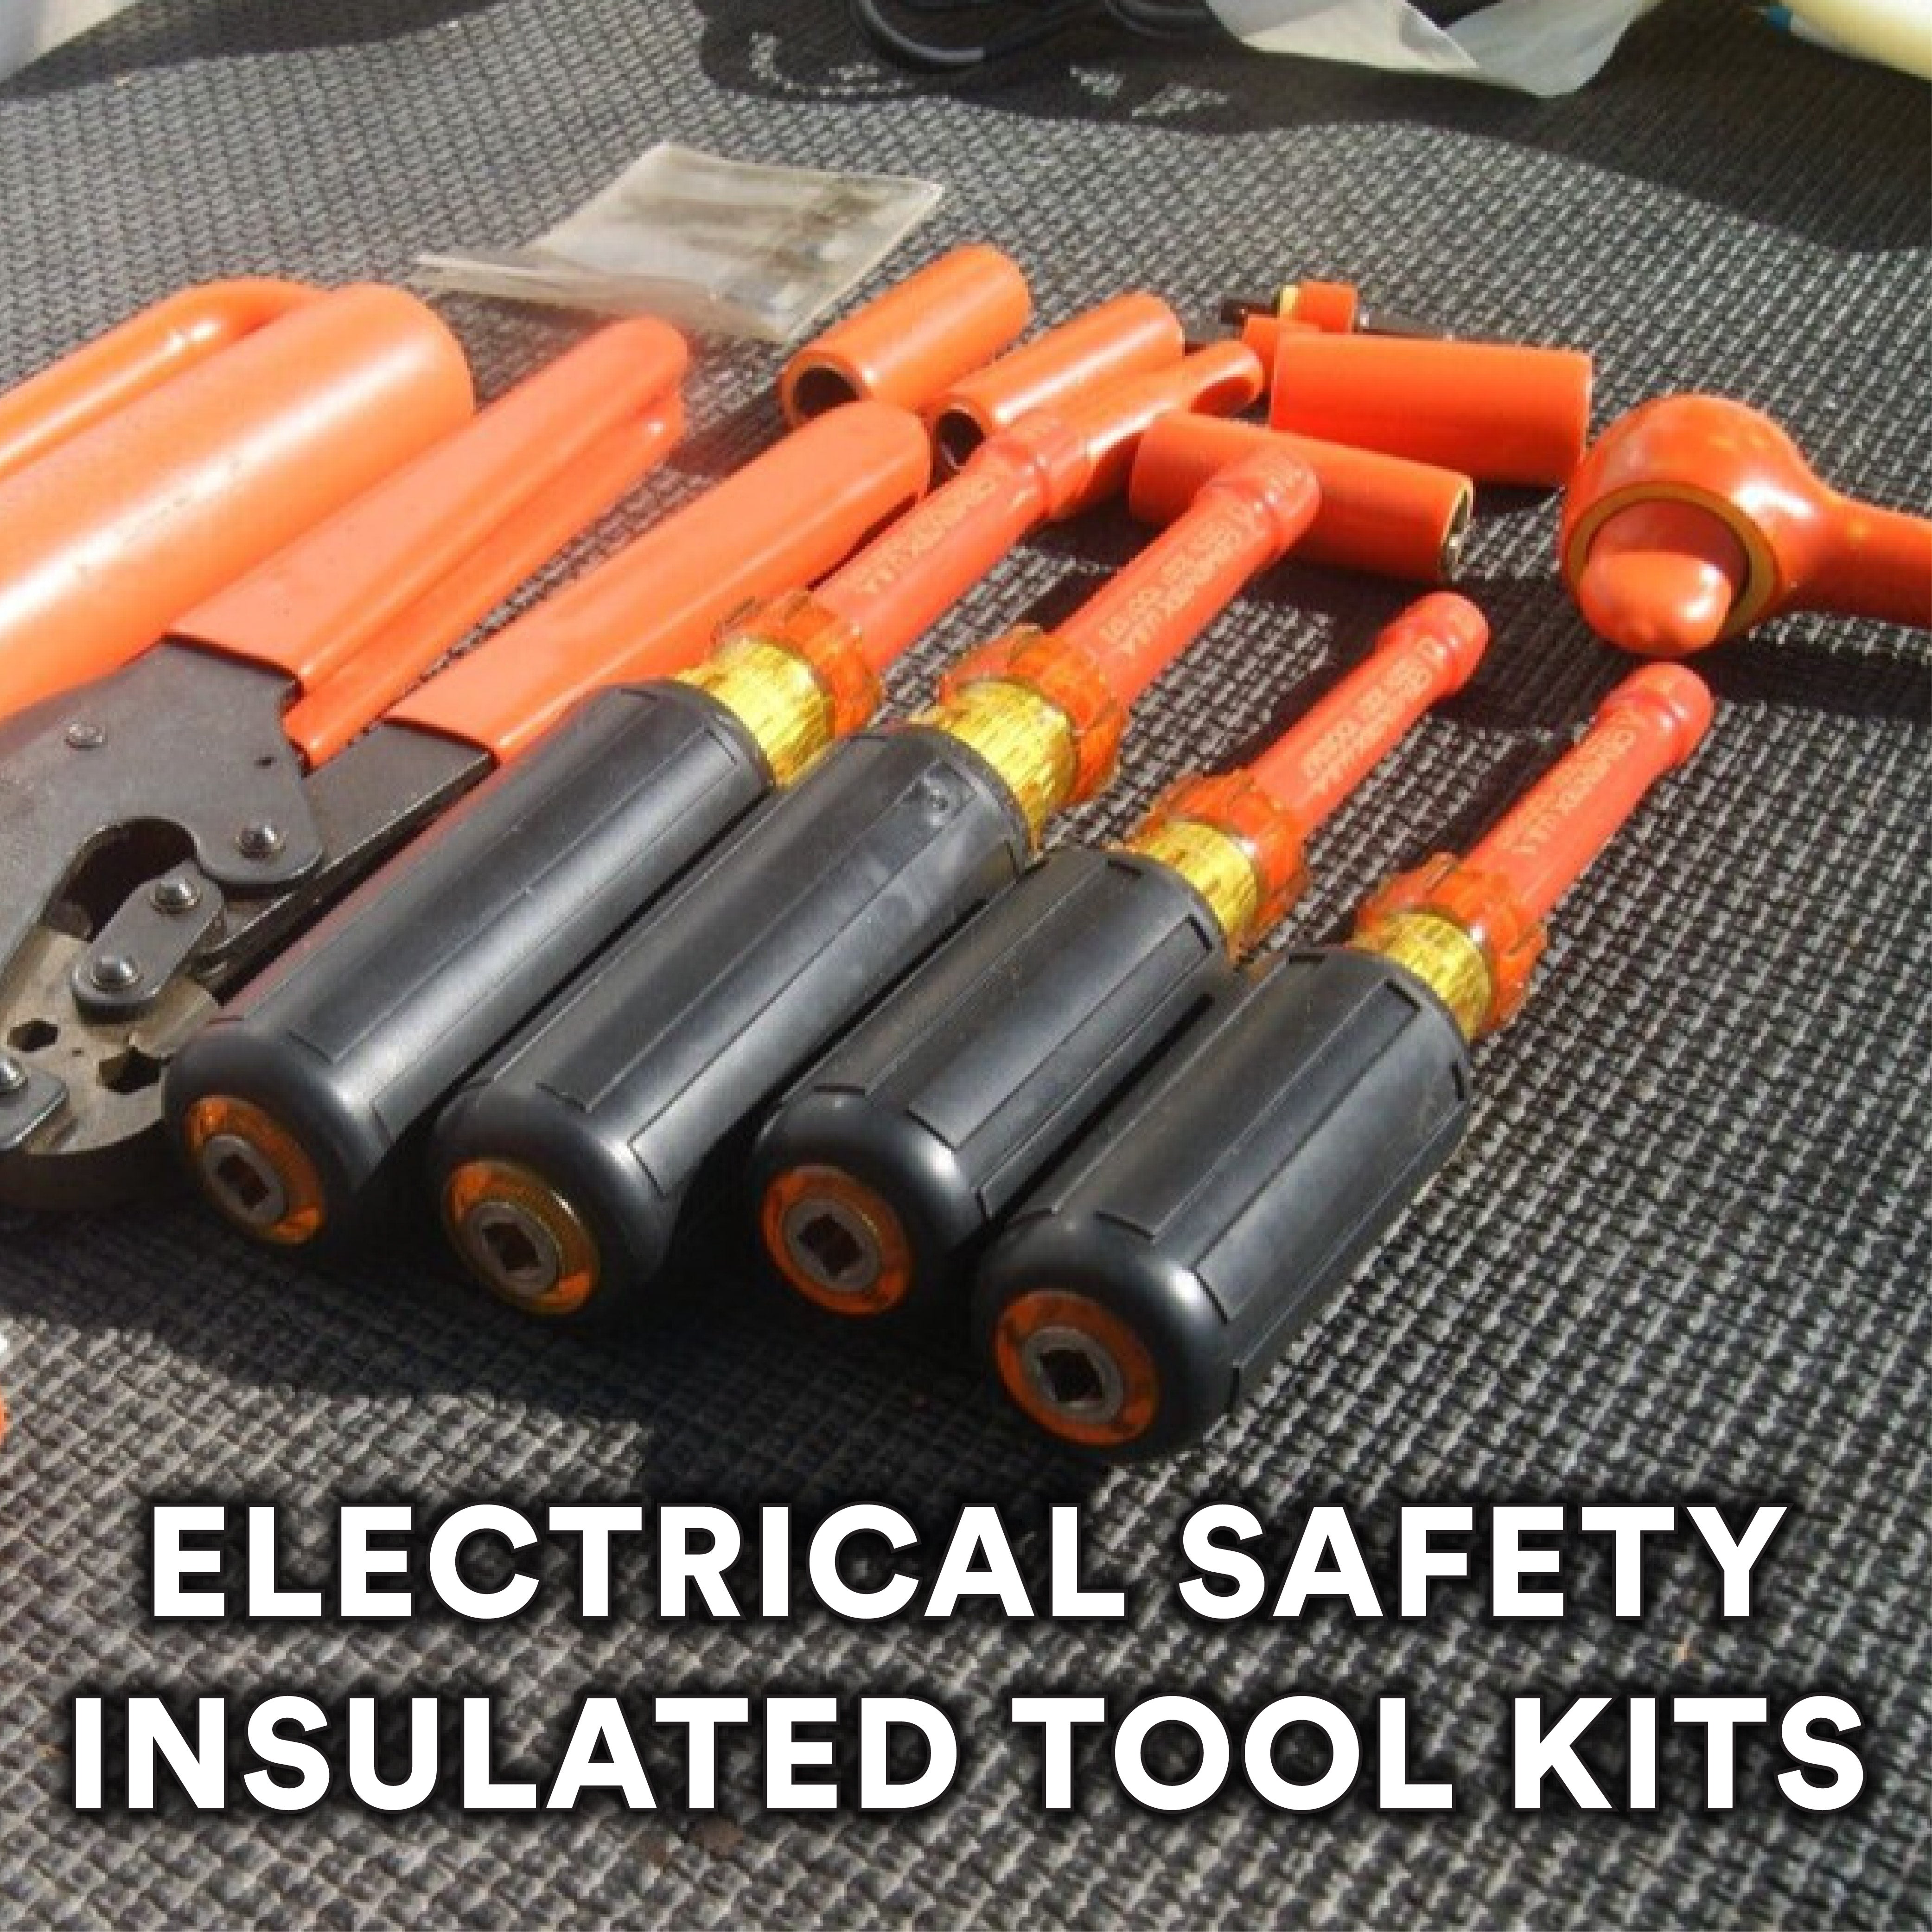 Electrical Safety Insulated Tool Kits